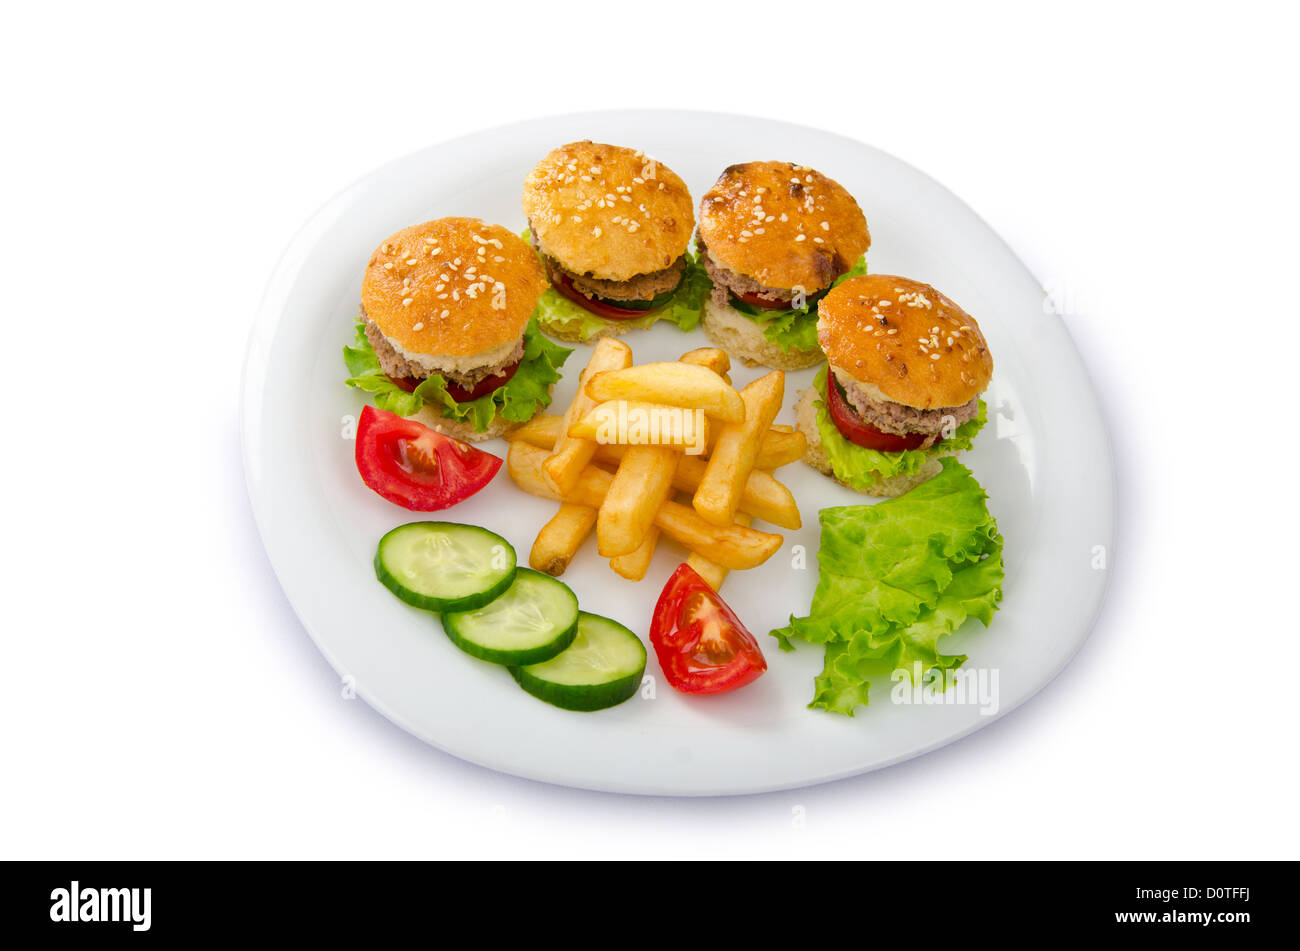 Plate with burgers and french fries Stock Photo